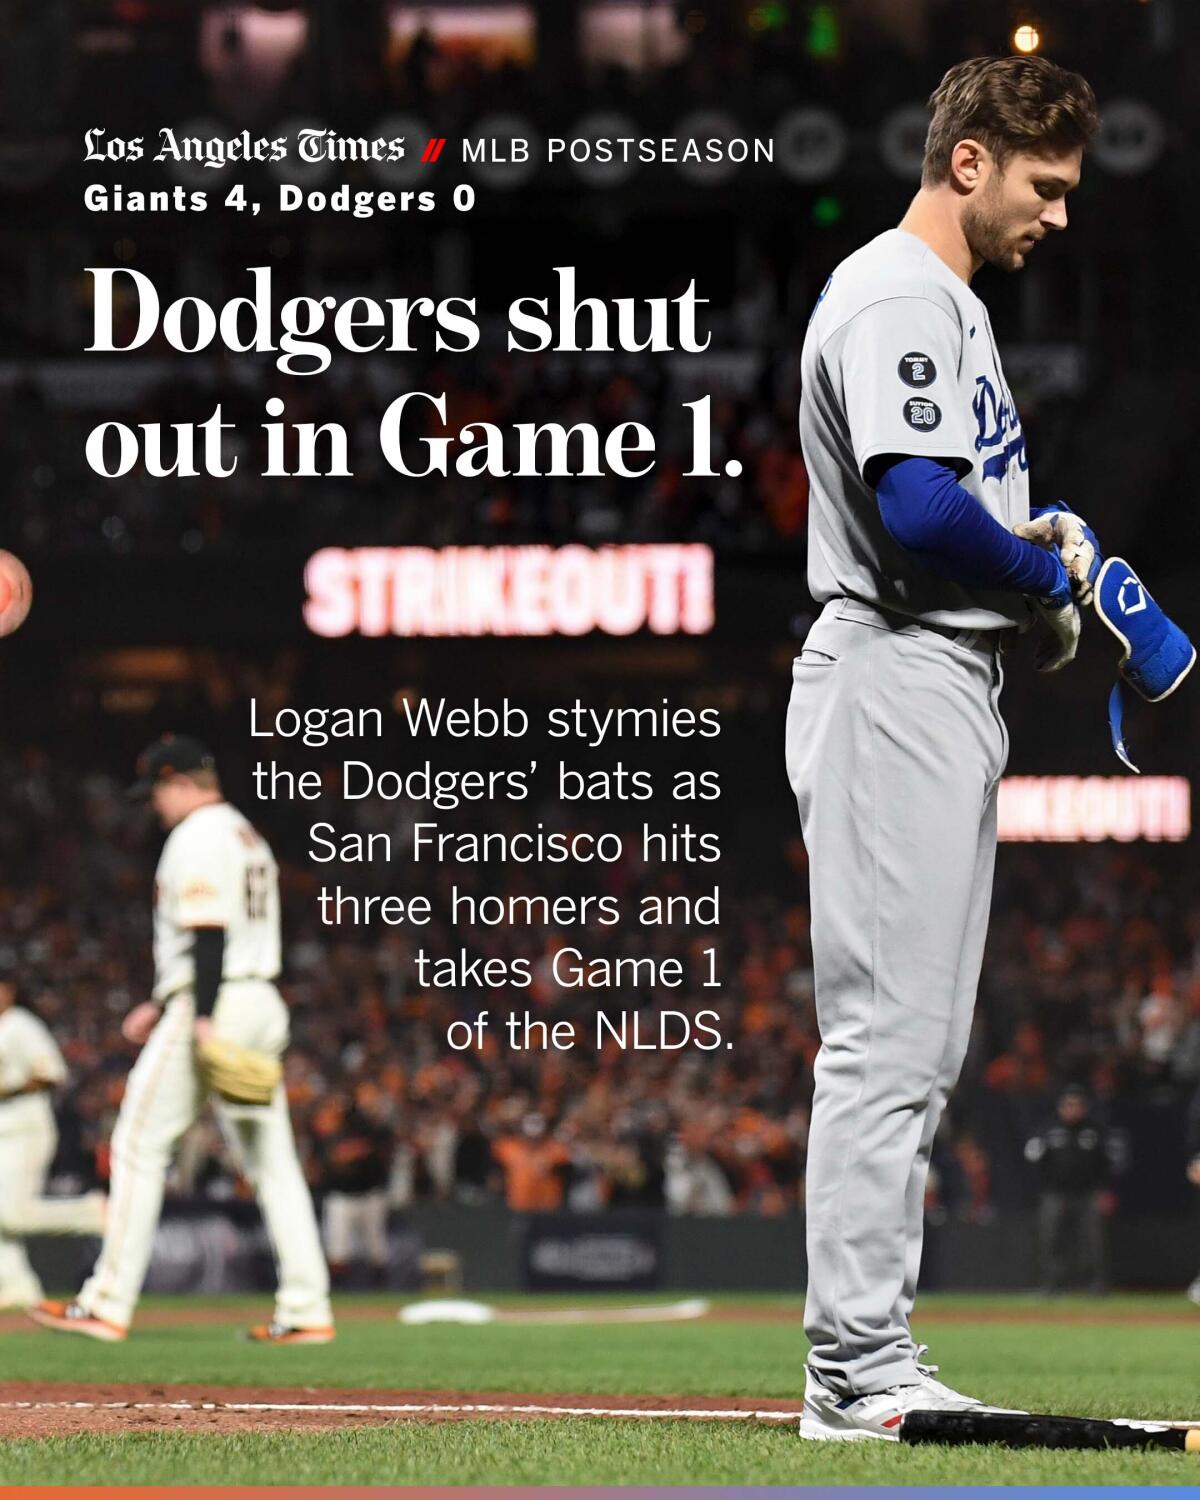 Dodgers lose to Giants in Game 1 of NLDS.